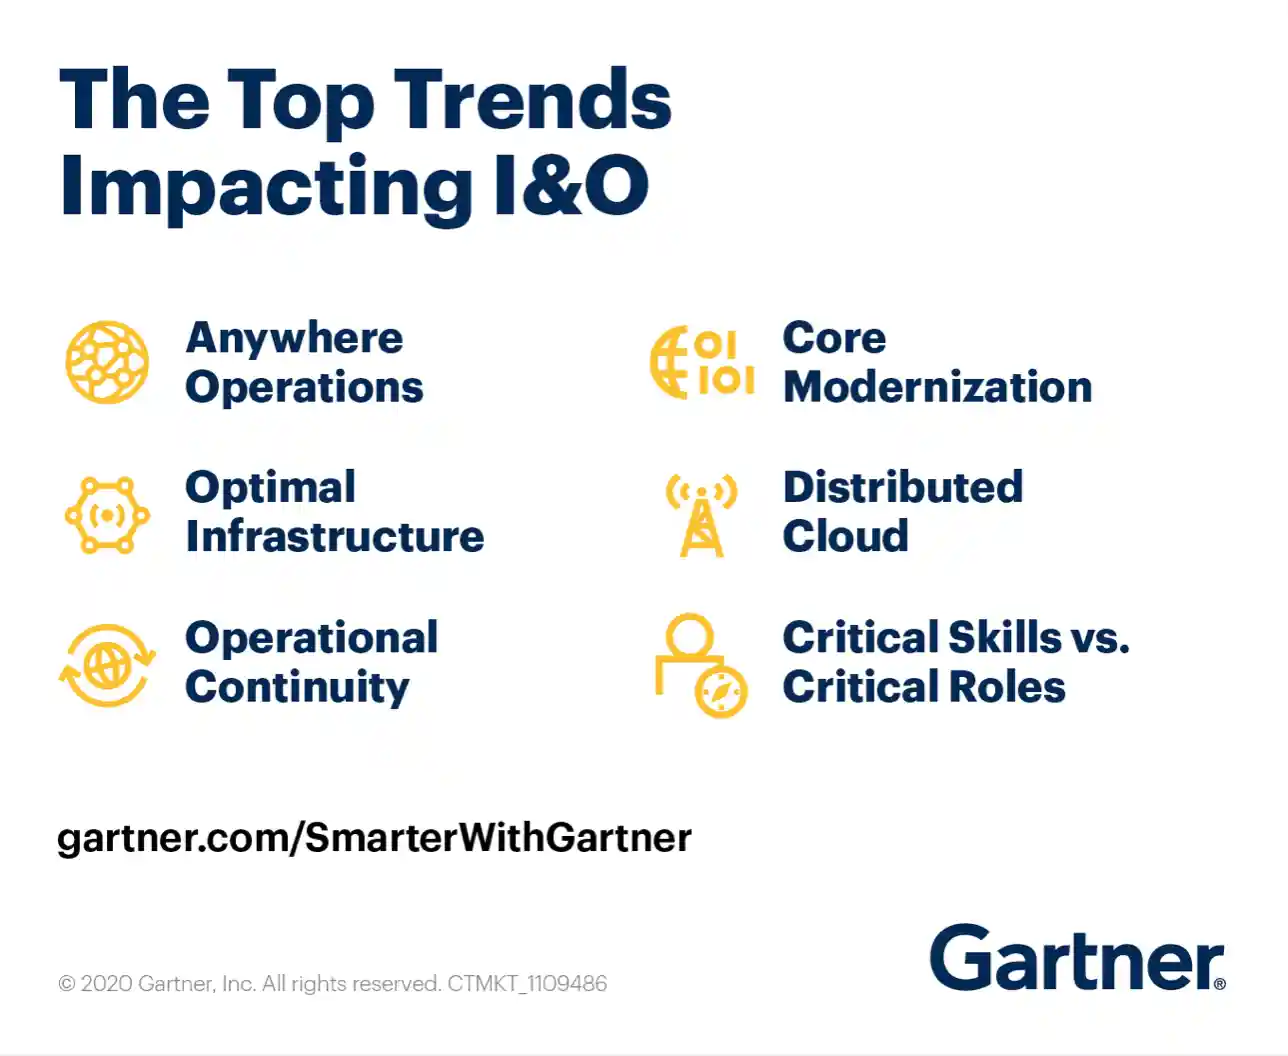 The Top Trends Impacting I&O